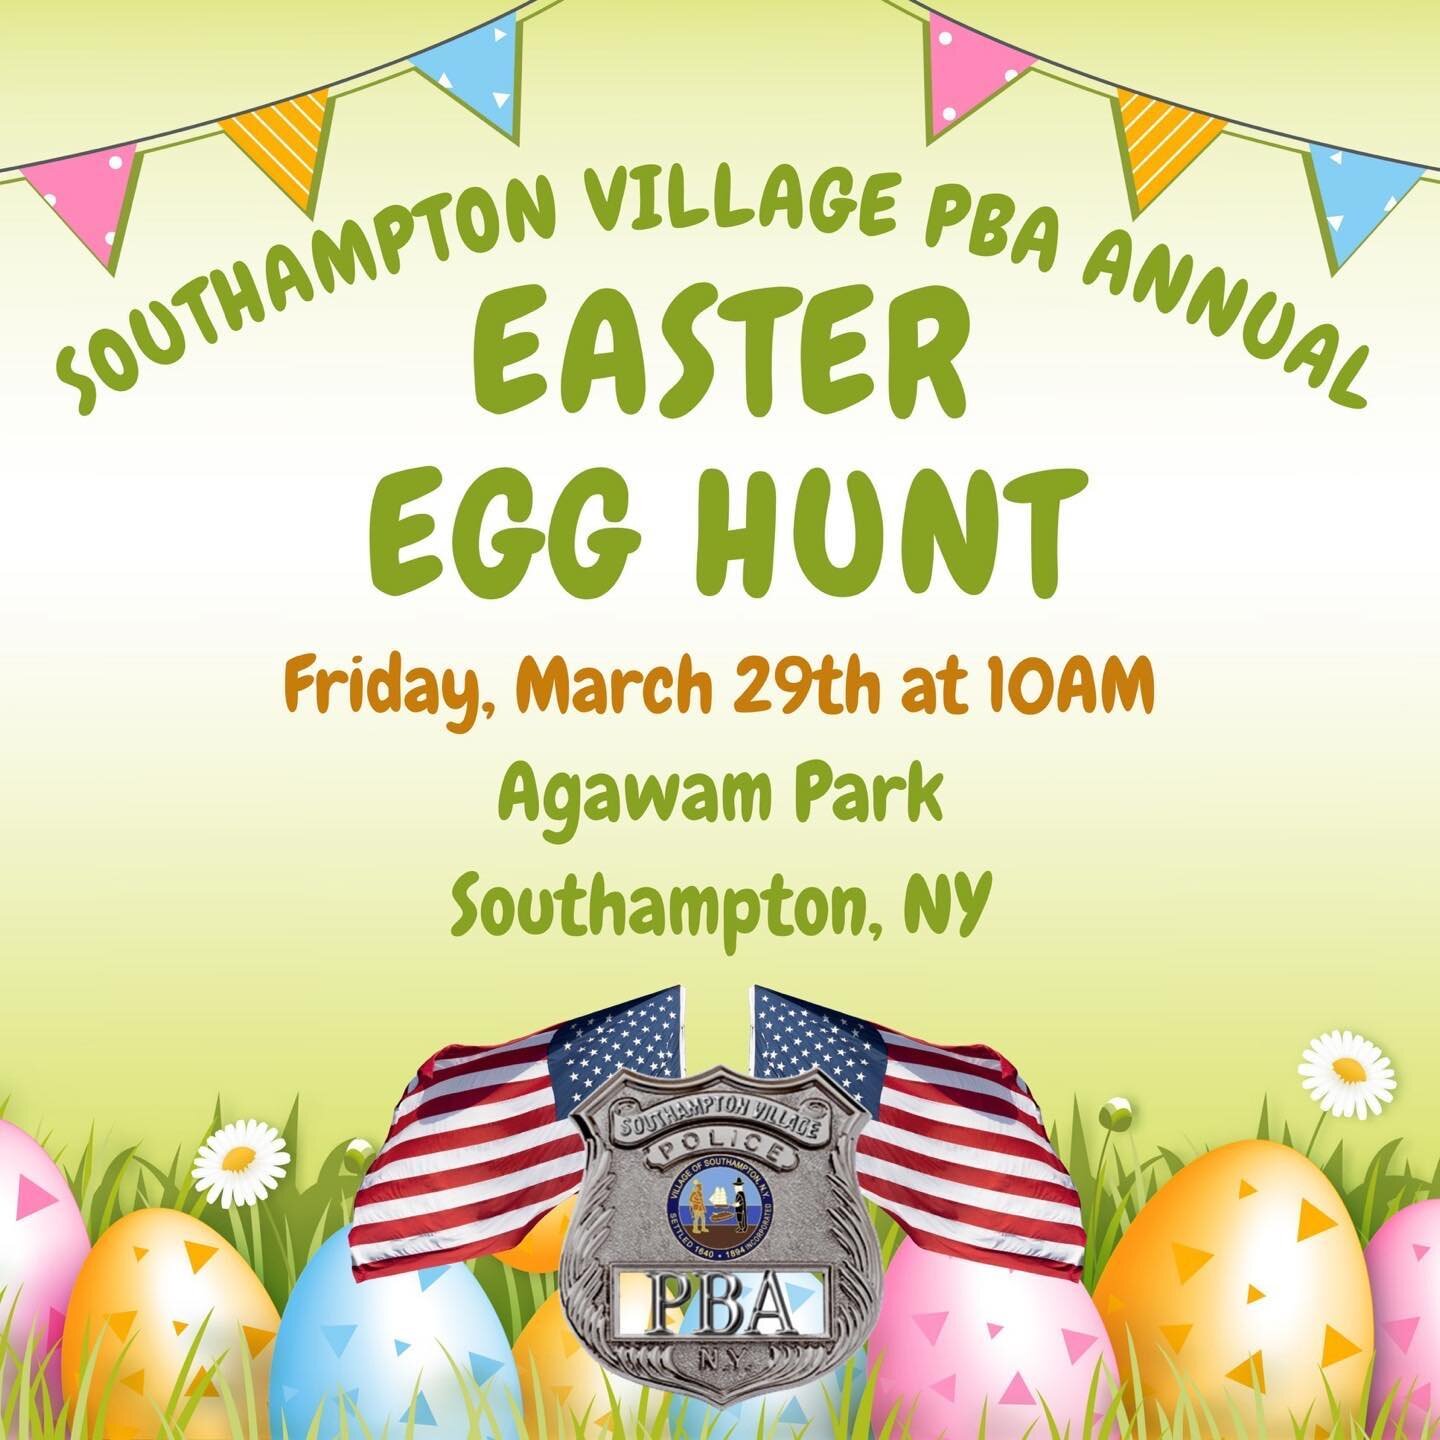 Come on out for our annual egg hunt! Tots to 10 years old. Get your picture with the bunny and a chance to find a grand prize egg!